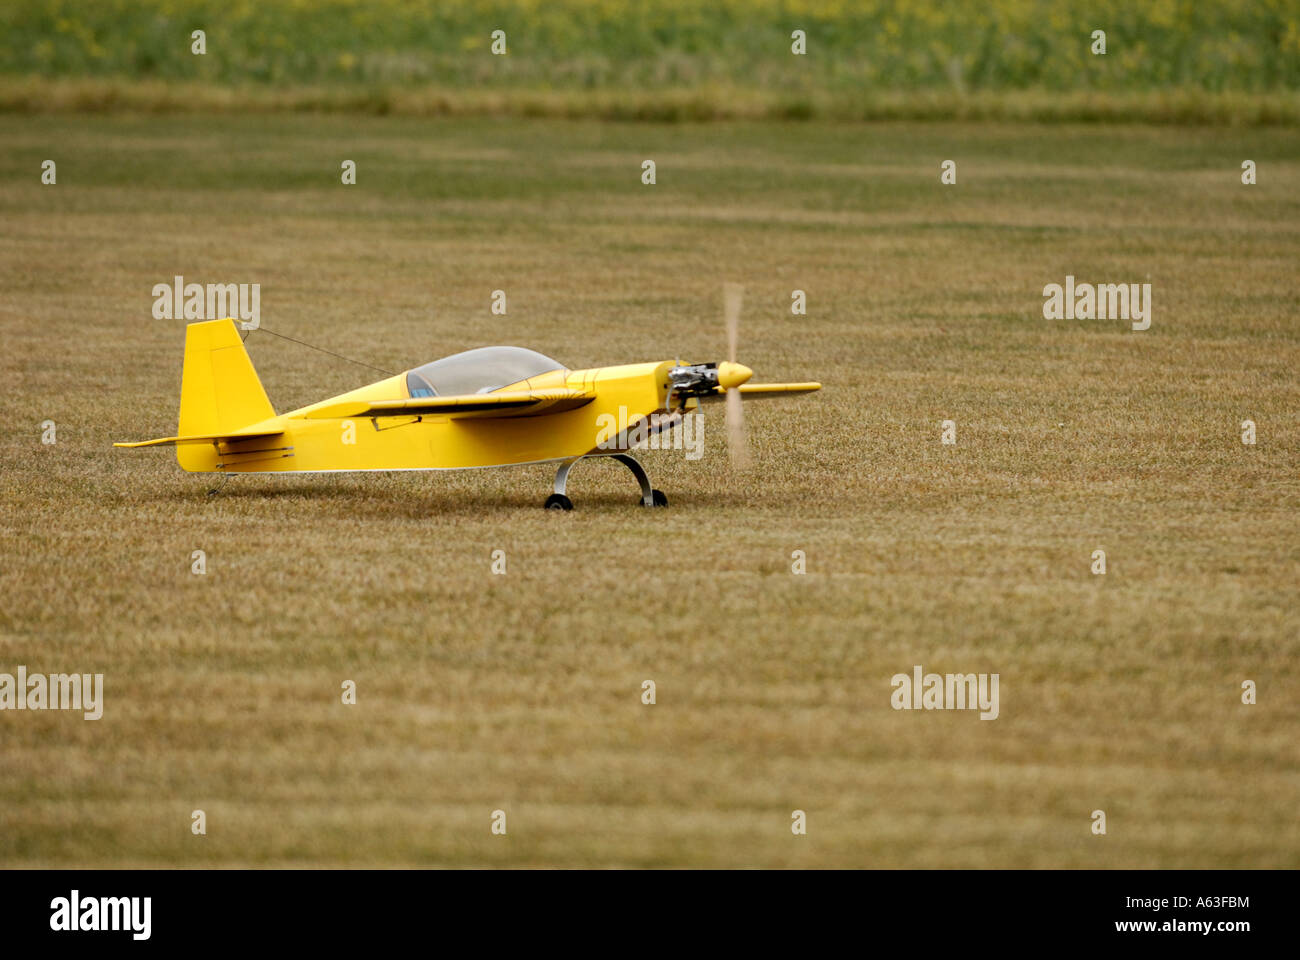 Model Airplane getting ready for take off. Stock Photo